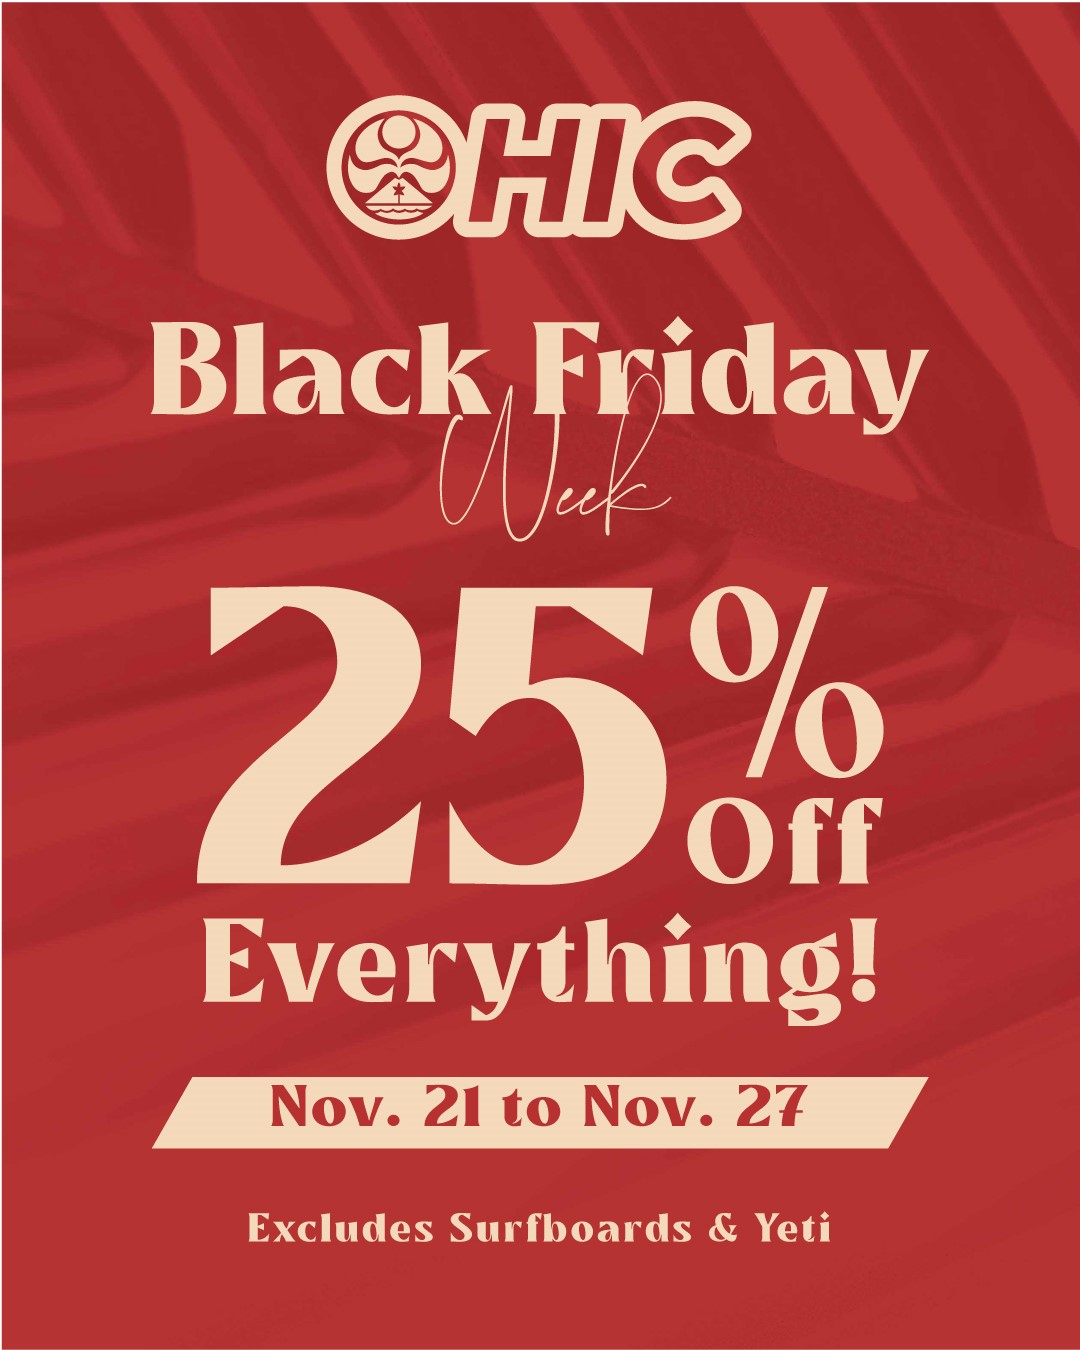 Black Friday Week from Hic Surf